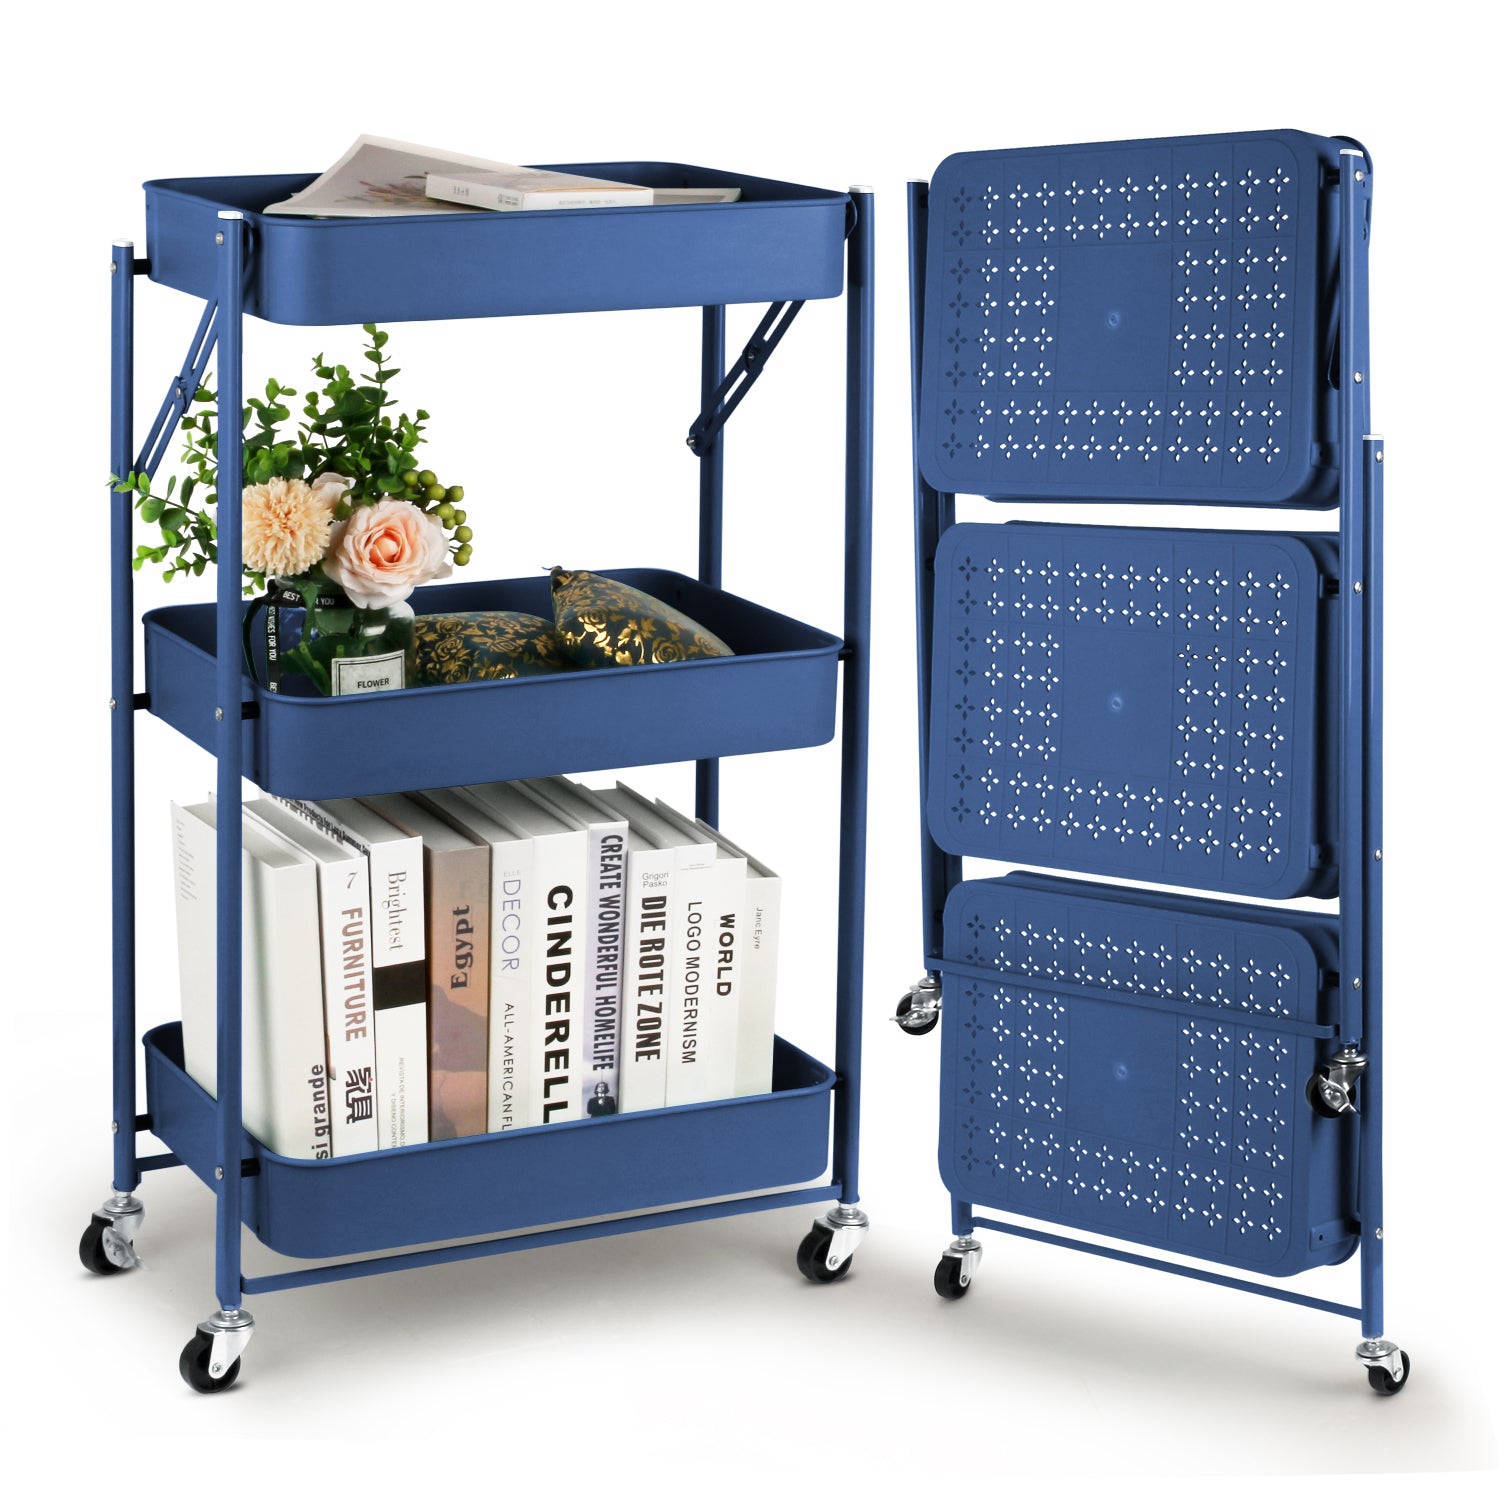 Folding-Trolley-with-Wheels-3-Tier-Mobile-Cart-Kitchen-Cart-No-Assembly-46-x-29-x-78-cm-for-Kitchen-Office-Bathroom-Cloakroom-Blue-Folding-Trolley-with-Wheels-Blue